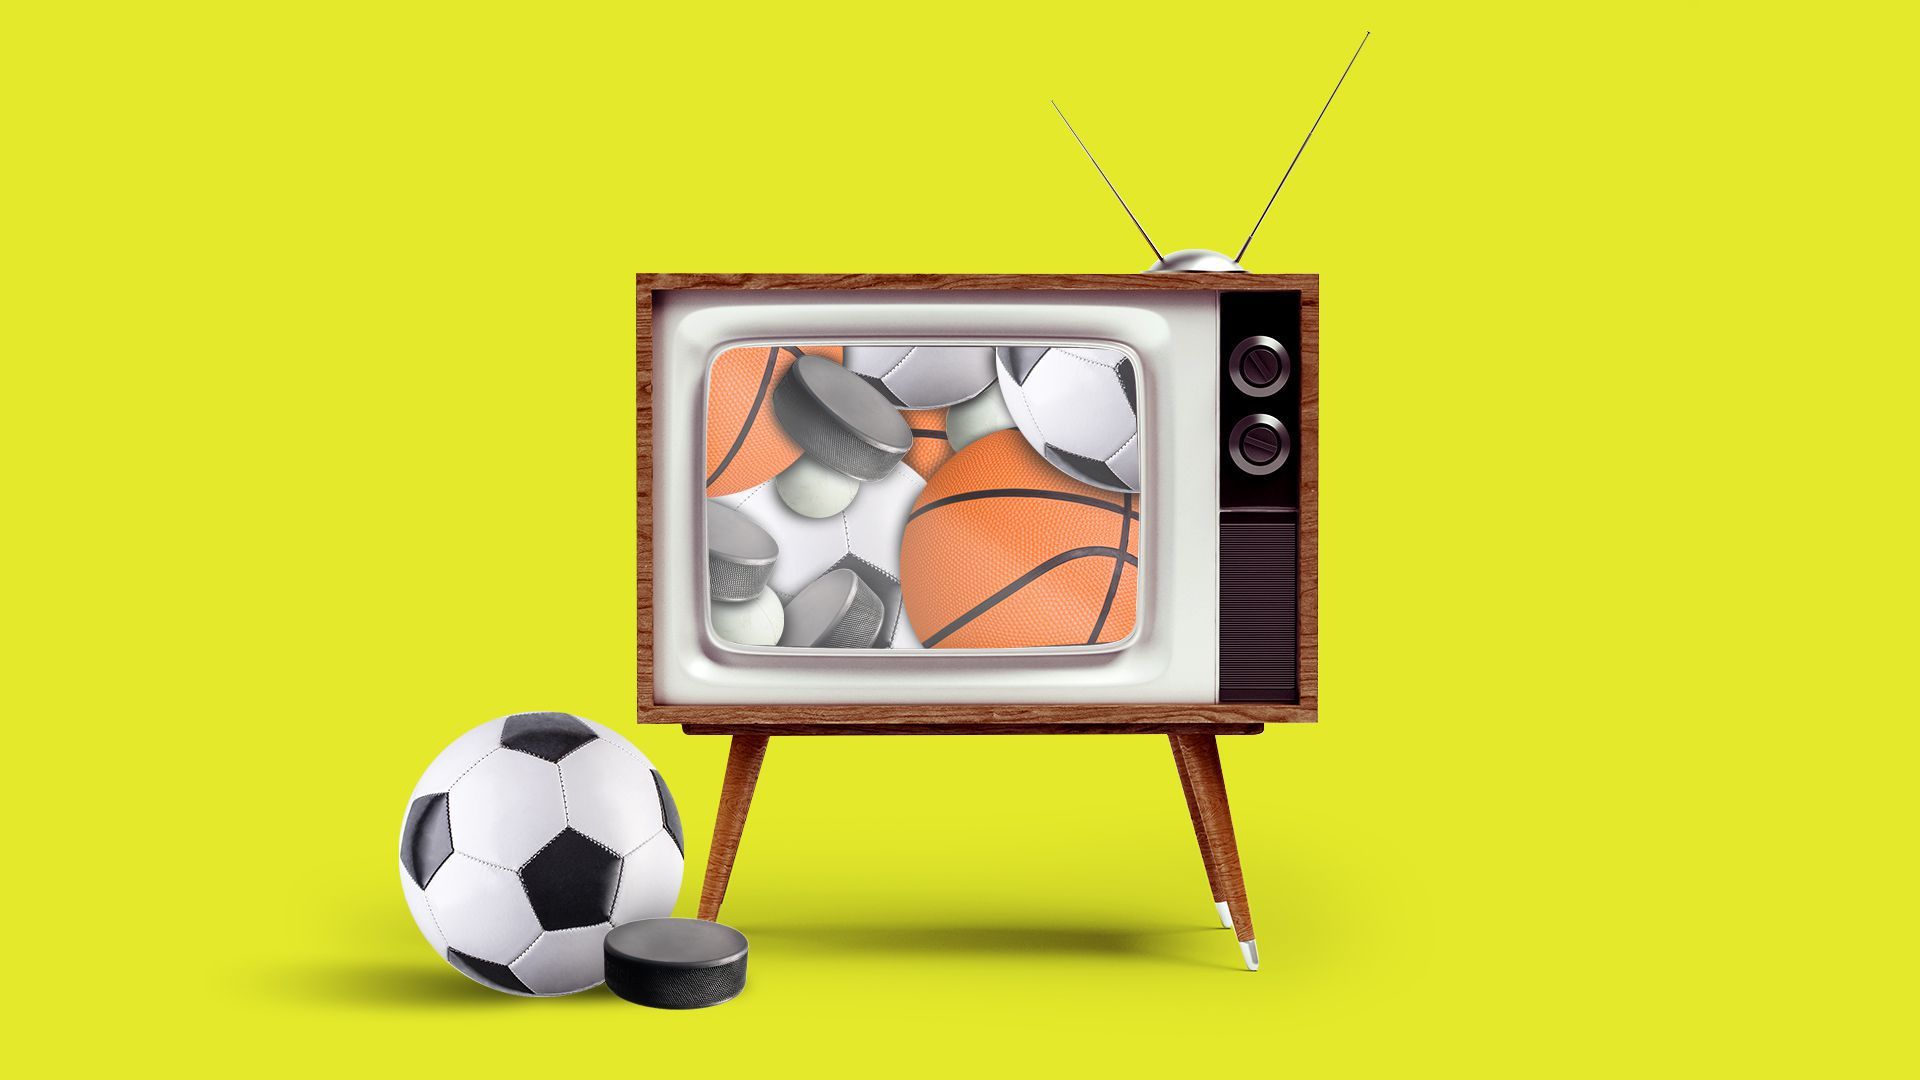 Tv console and sports equipment